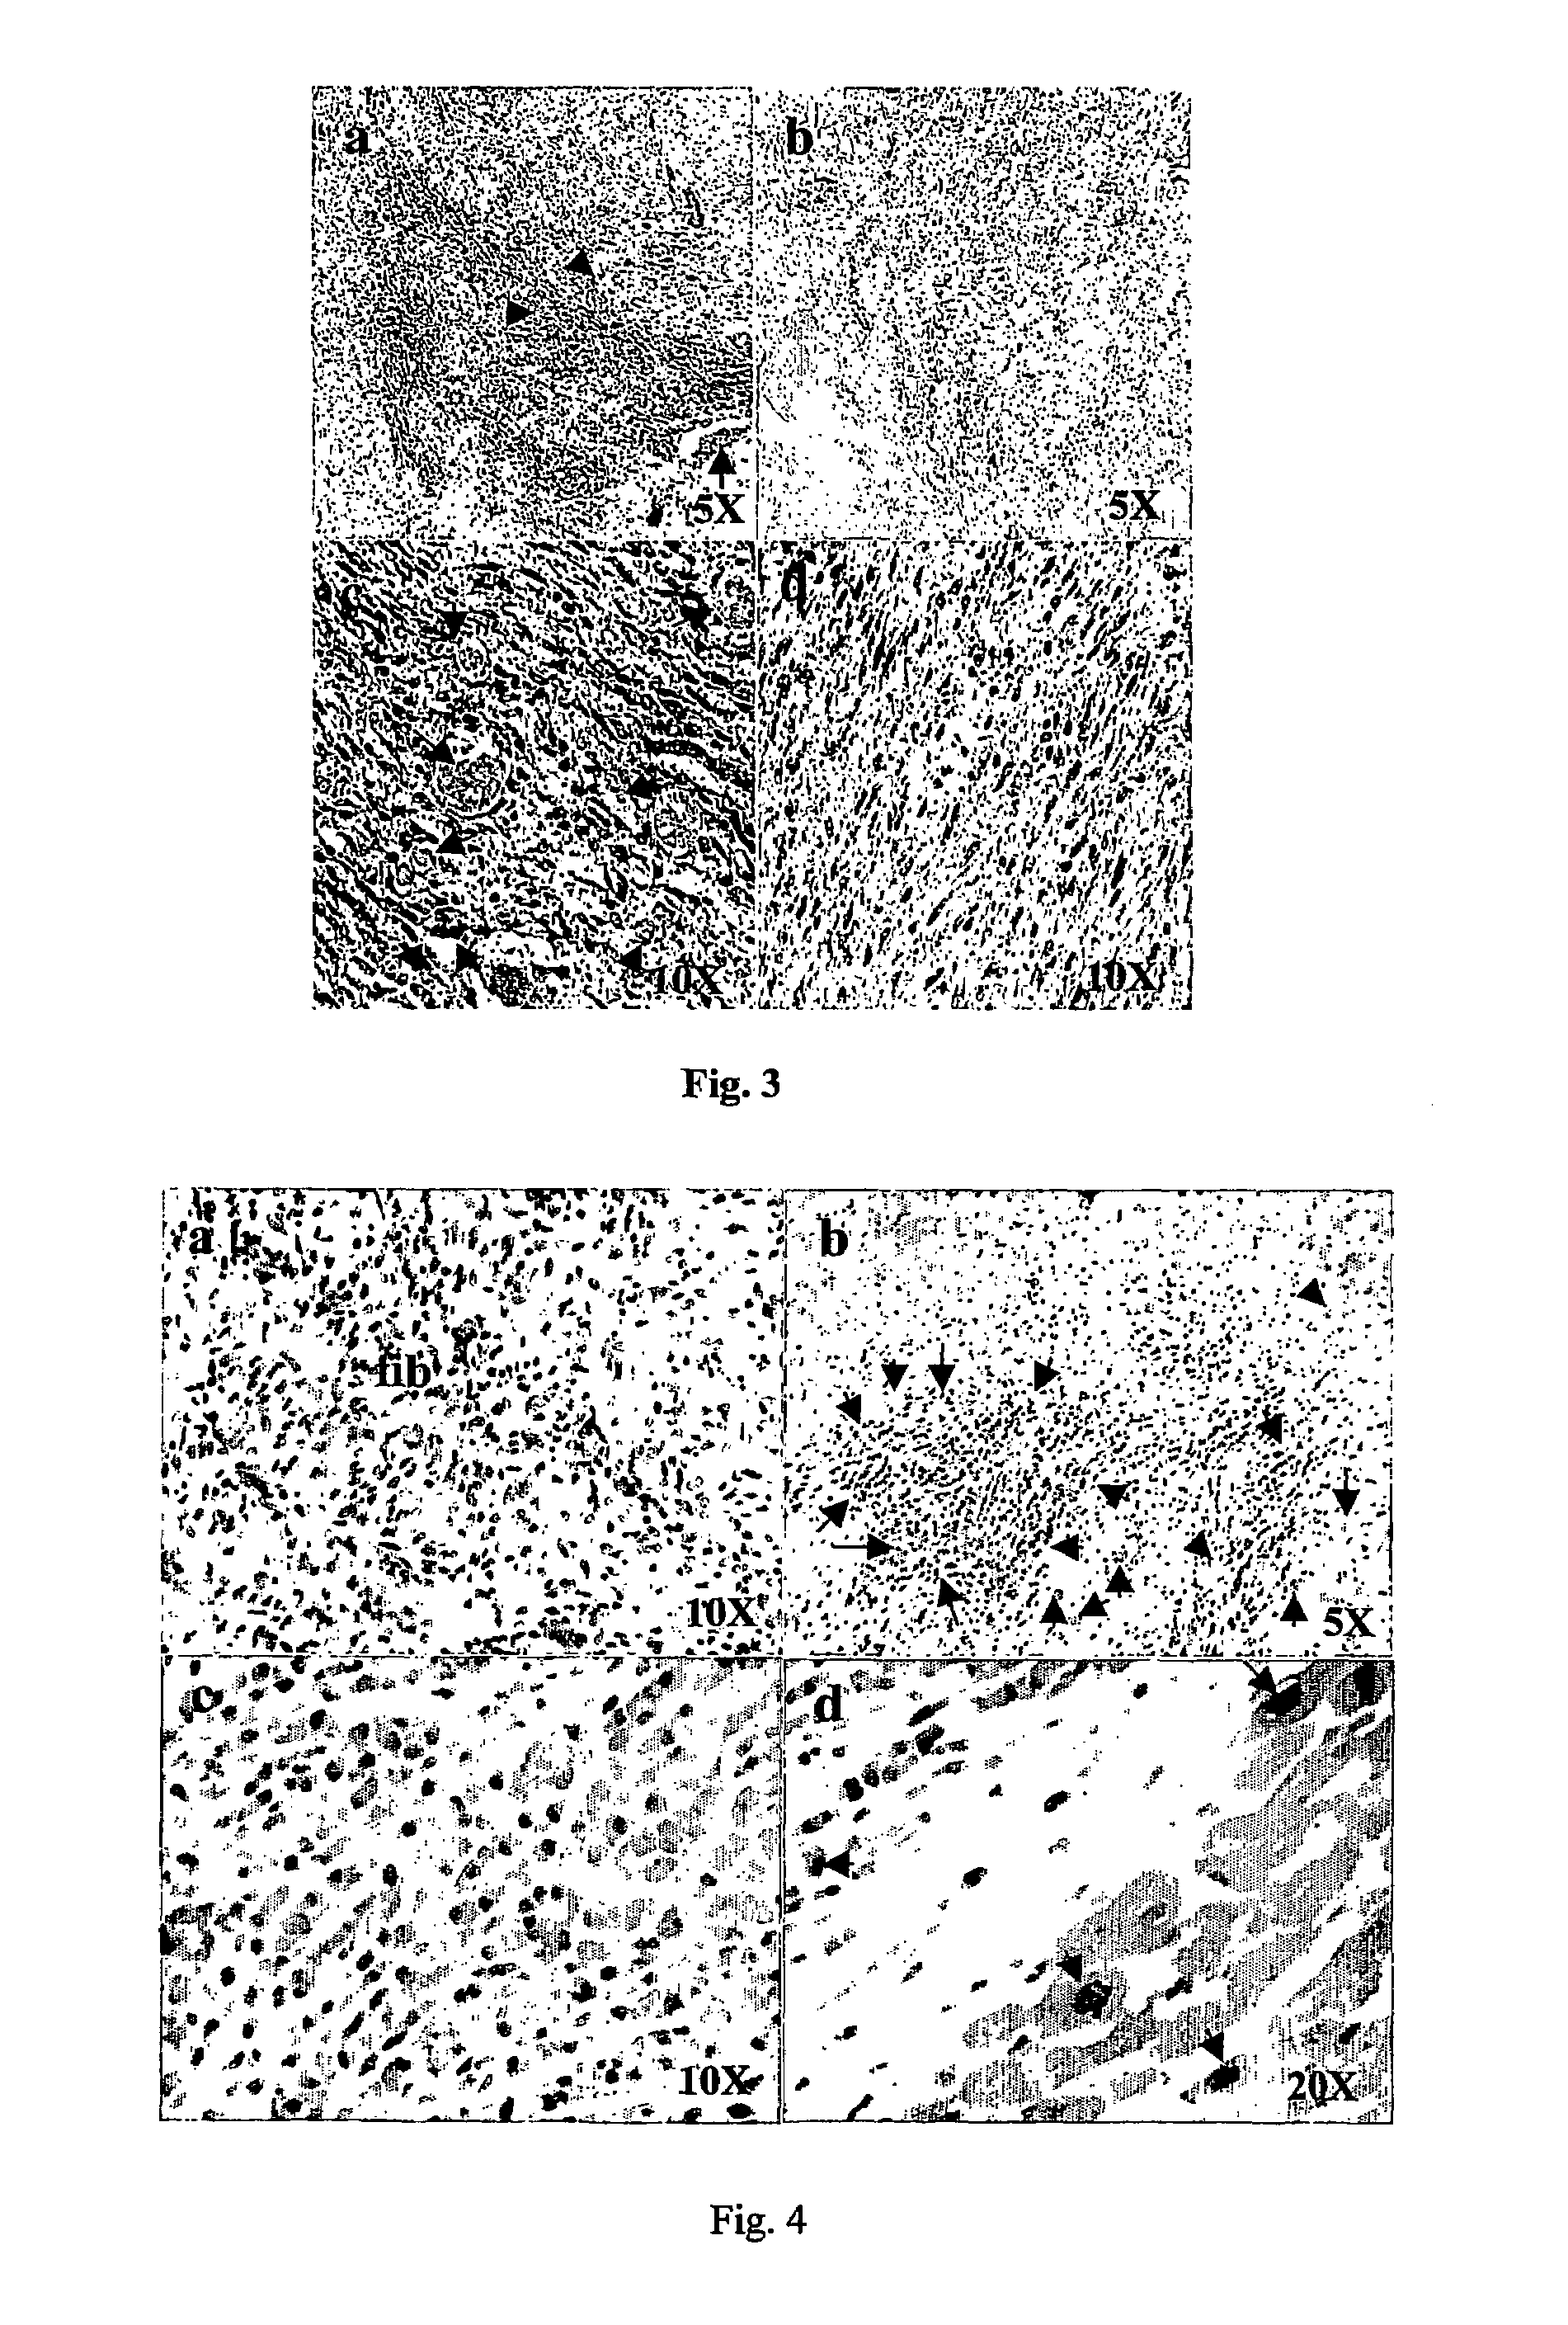 Compositions comprising organic extracts of <i>Geum japonicum thunb </i>var. and the use thereof